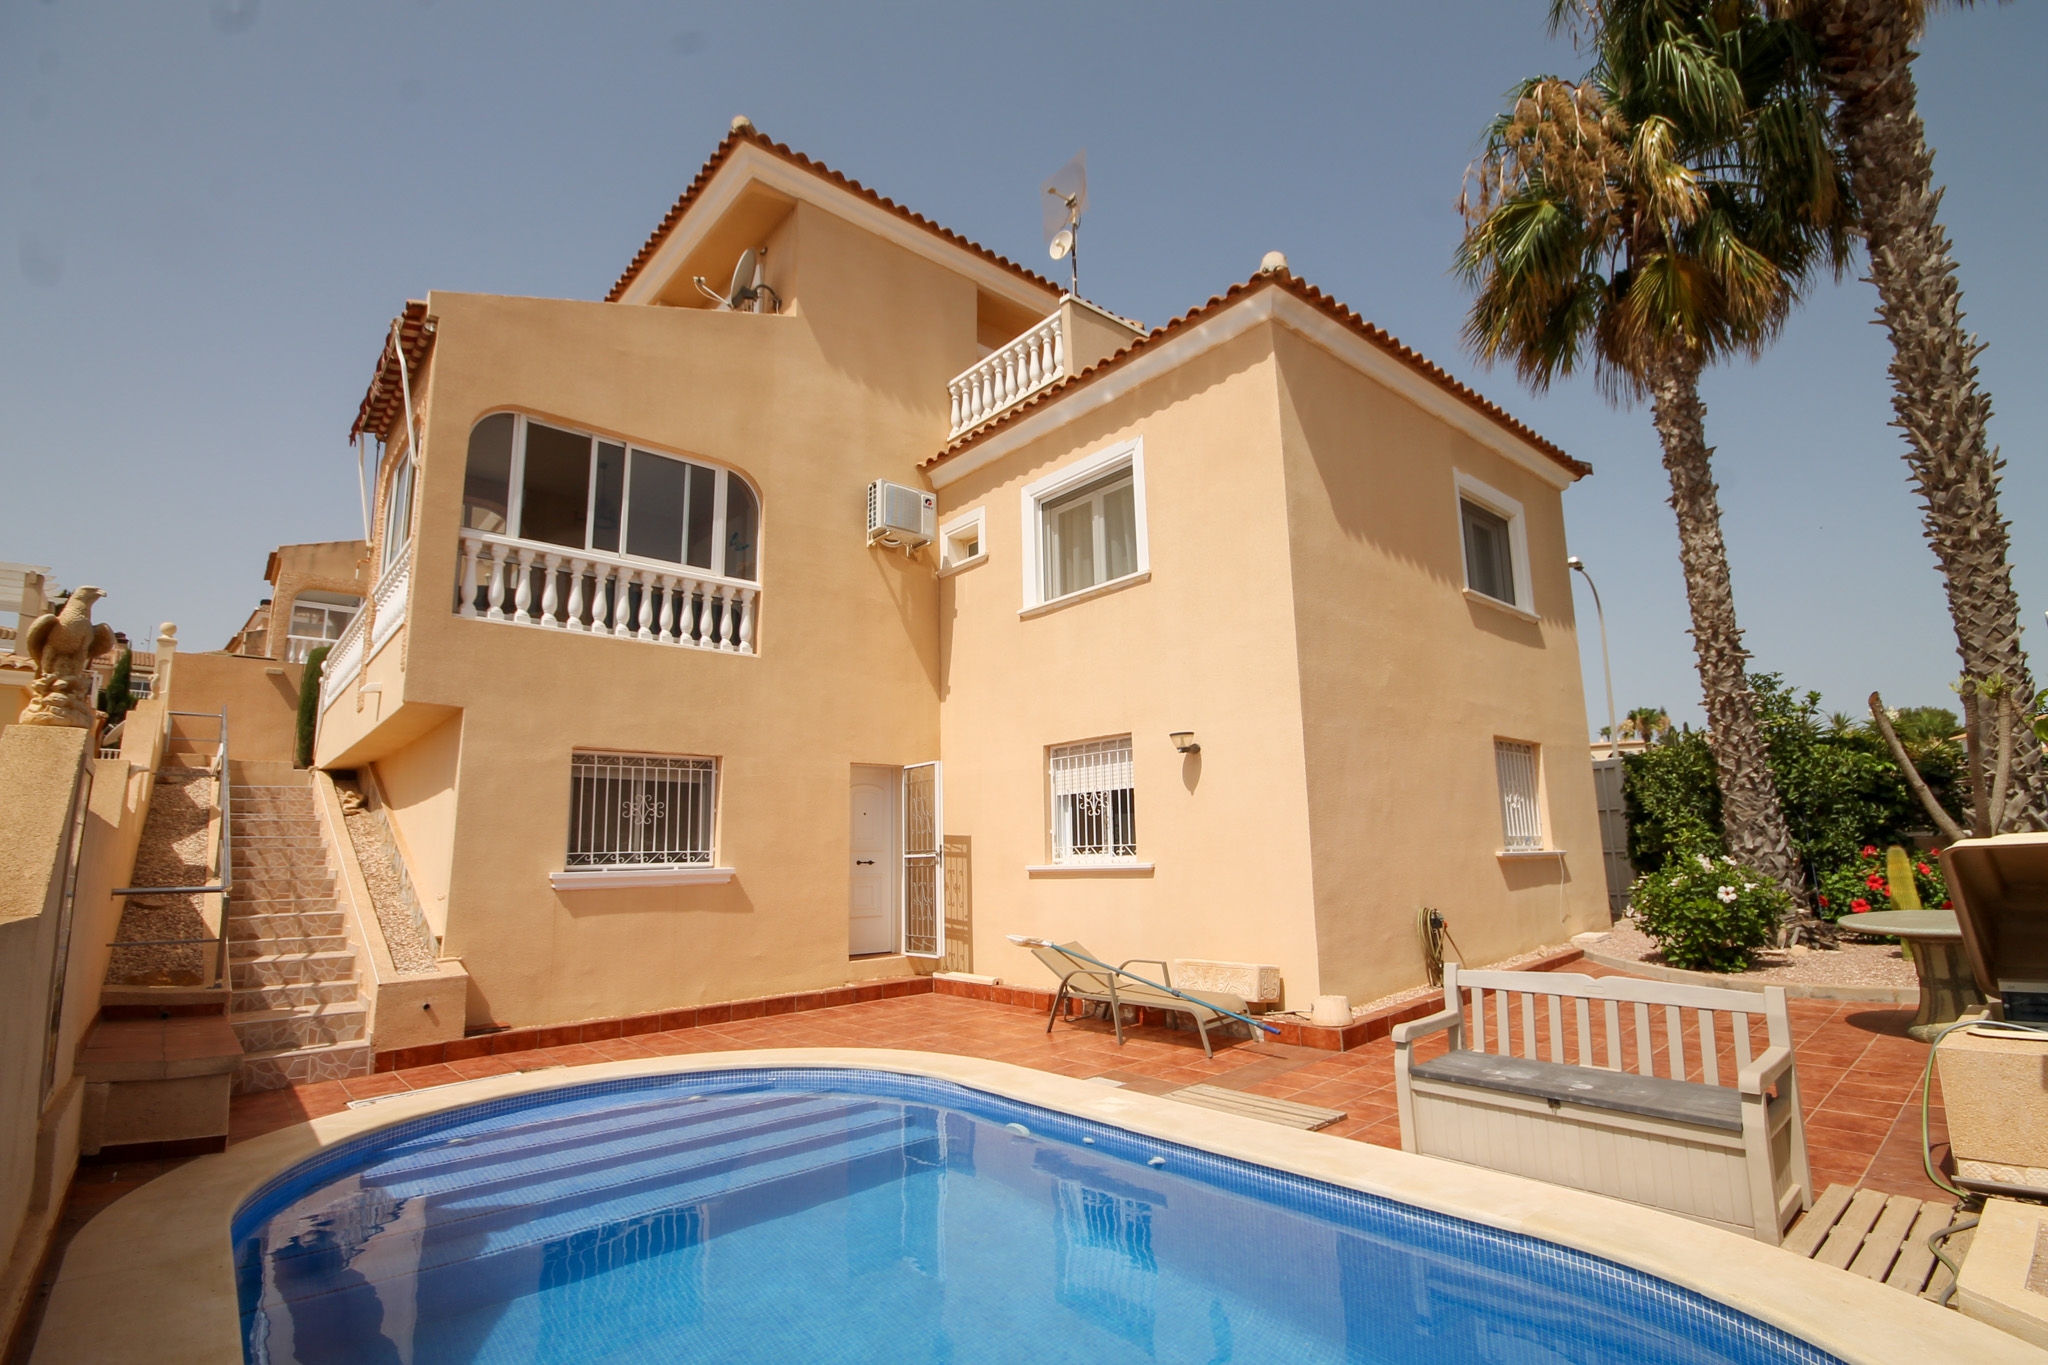 Four bedroom detached villa with pool